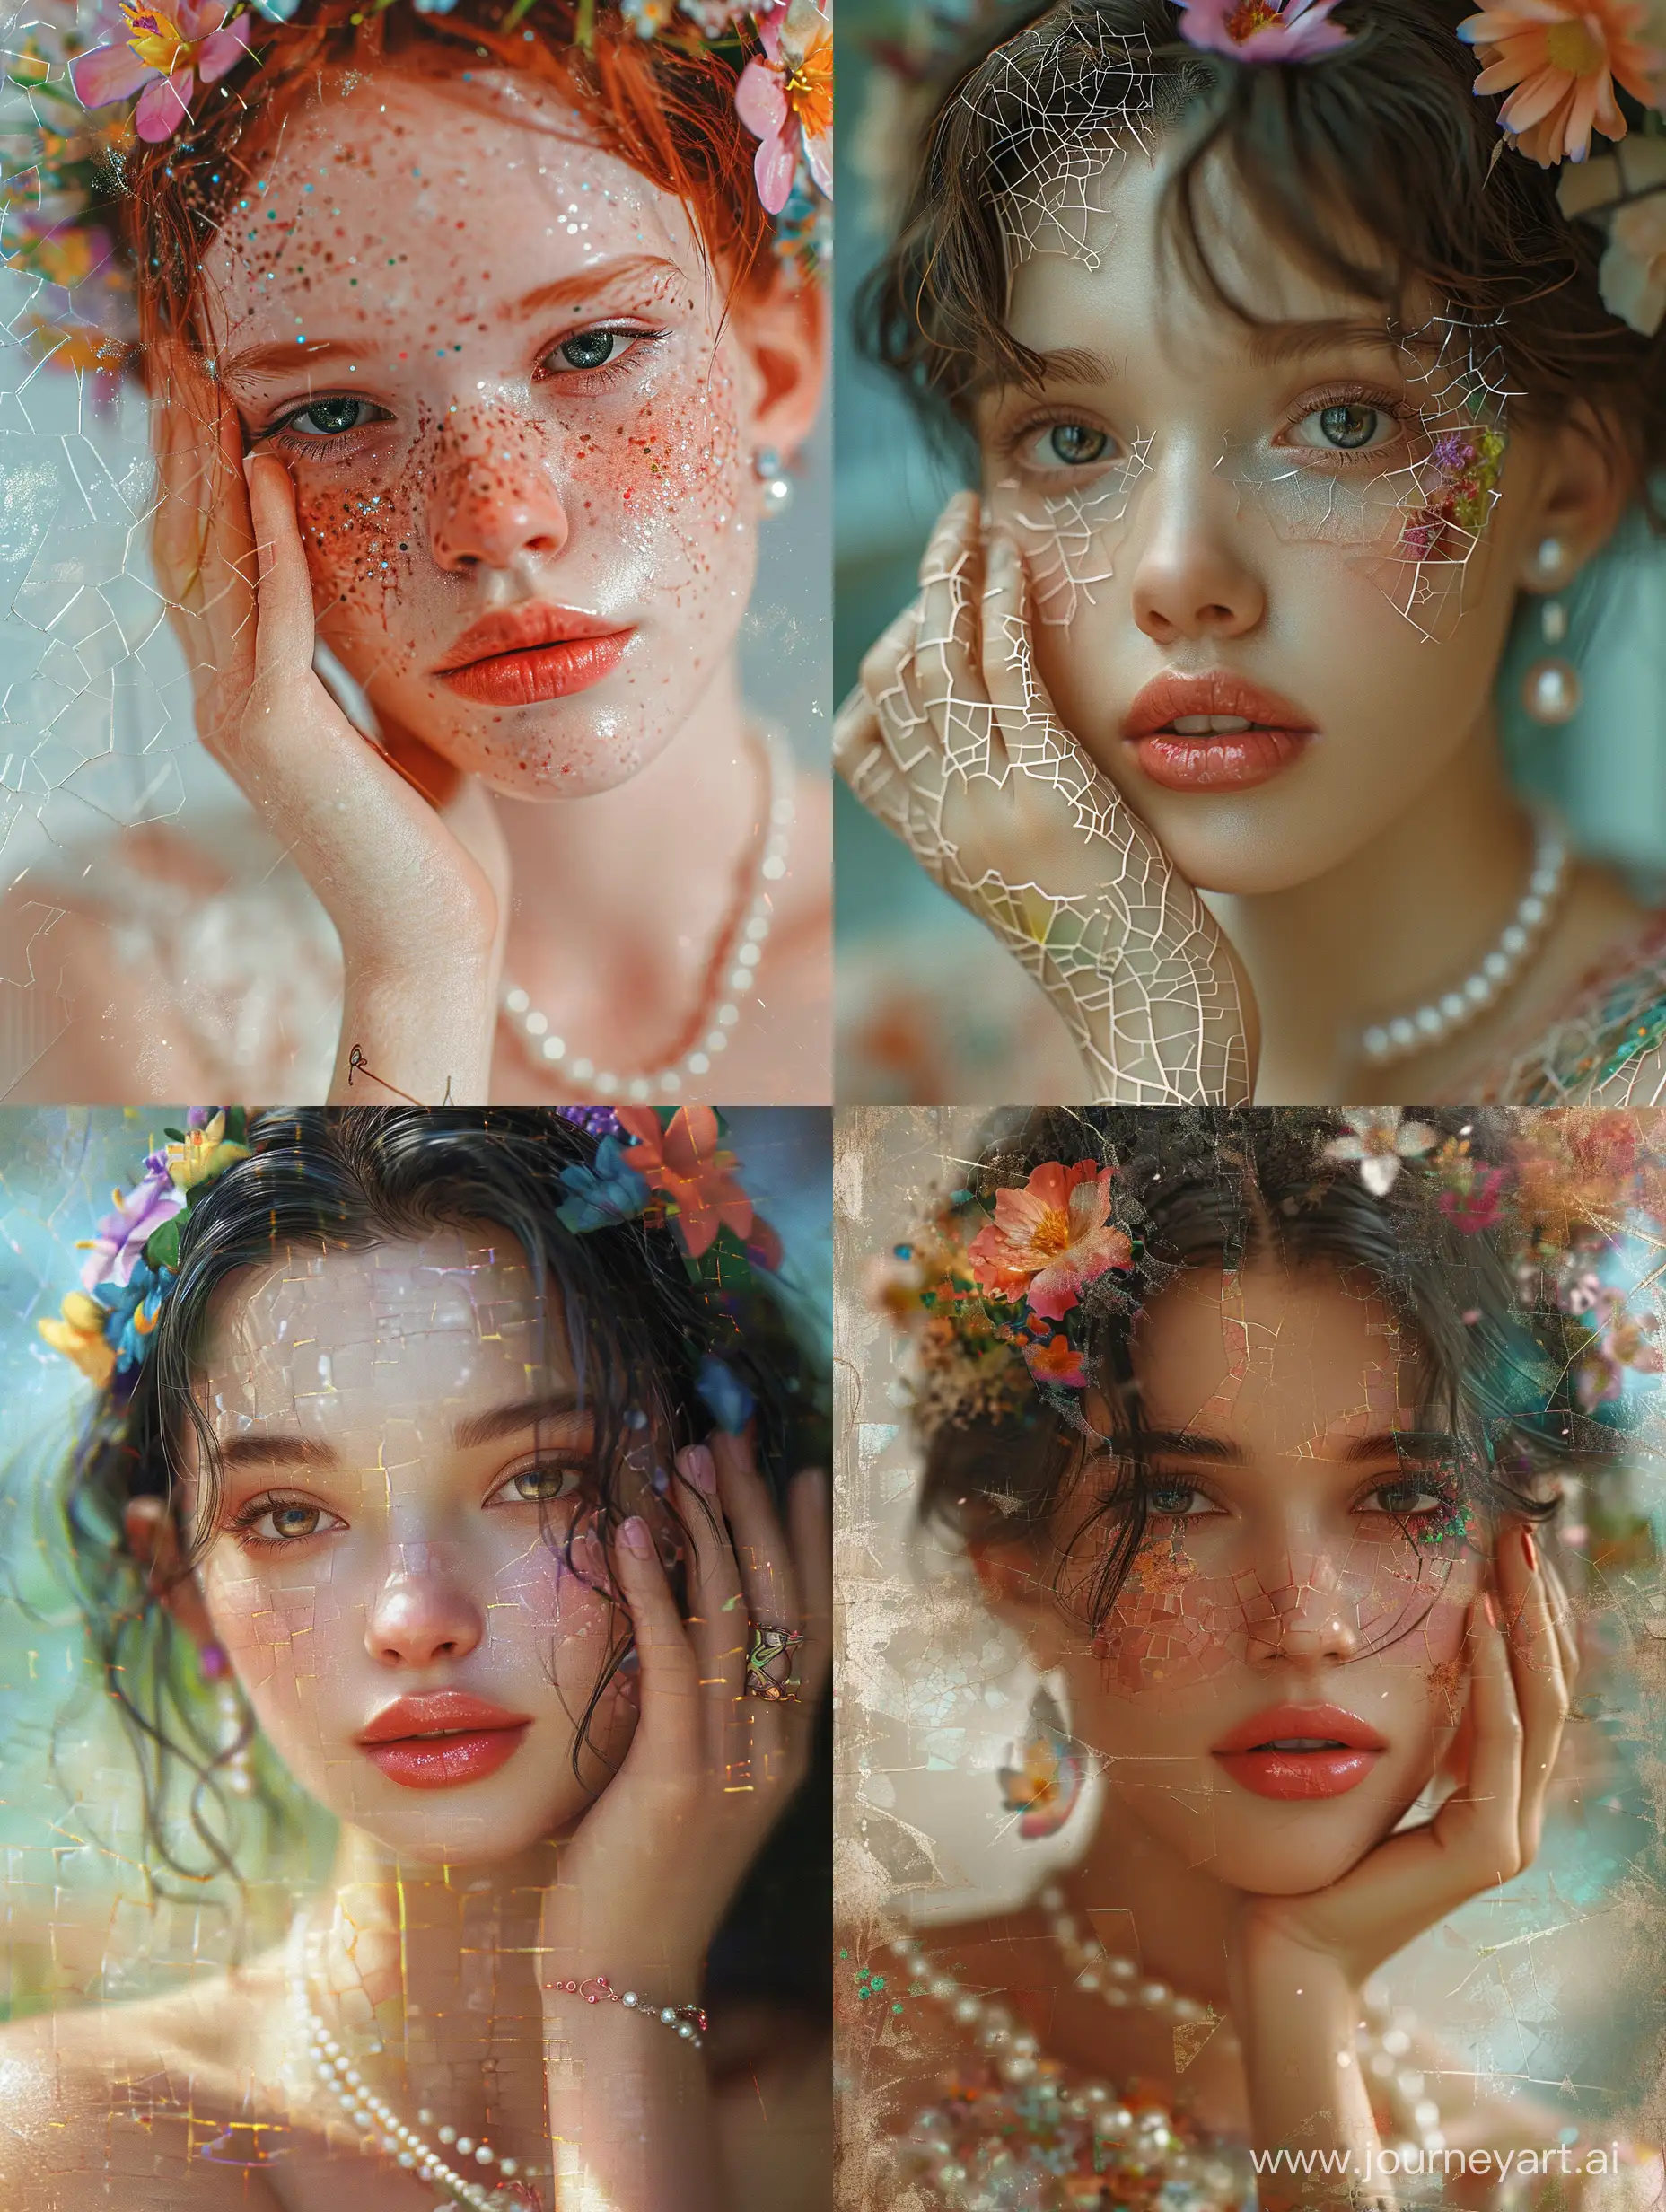 Portrait of a young woman with soft, dark eyes, full lips, and delicate features. Her elegantly styled hair, adorned with colorful flowers, frames her face. The mosaic-like texture creates an impressionistic touch, with a luminous quality to her peach and rose-toned skin. Adorned with classic pearl earrings and necklace, she poses thoughtfully with a hand resting against her cheek, exuding timeless grace against a cool, blurred background.  Negative prompt: Blur, extra fingers, blur face, short hair, bad anatomy, distorted fingers, ugly